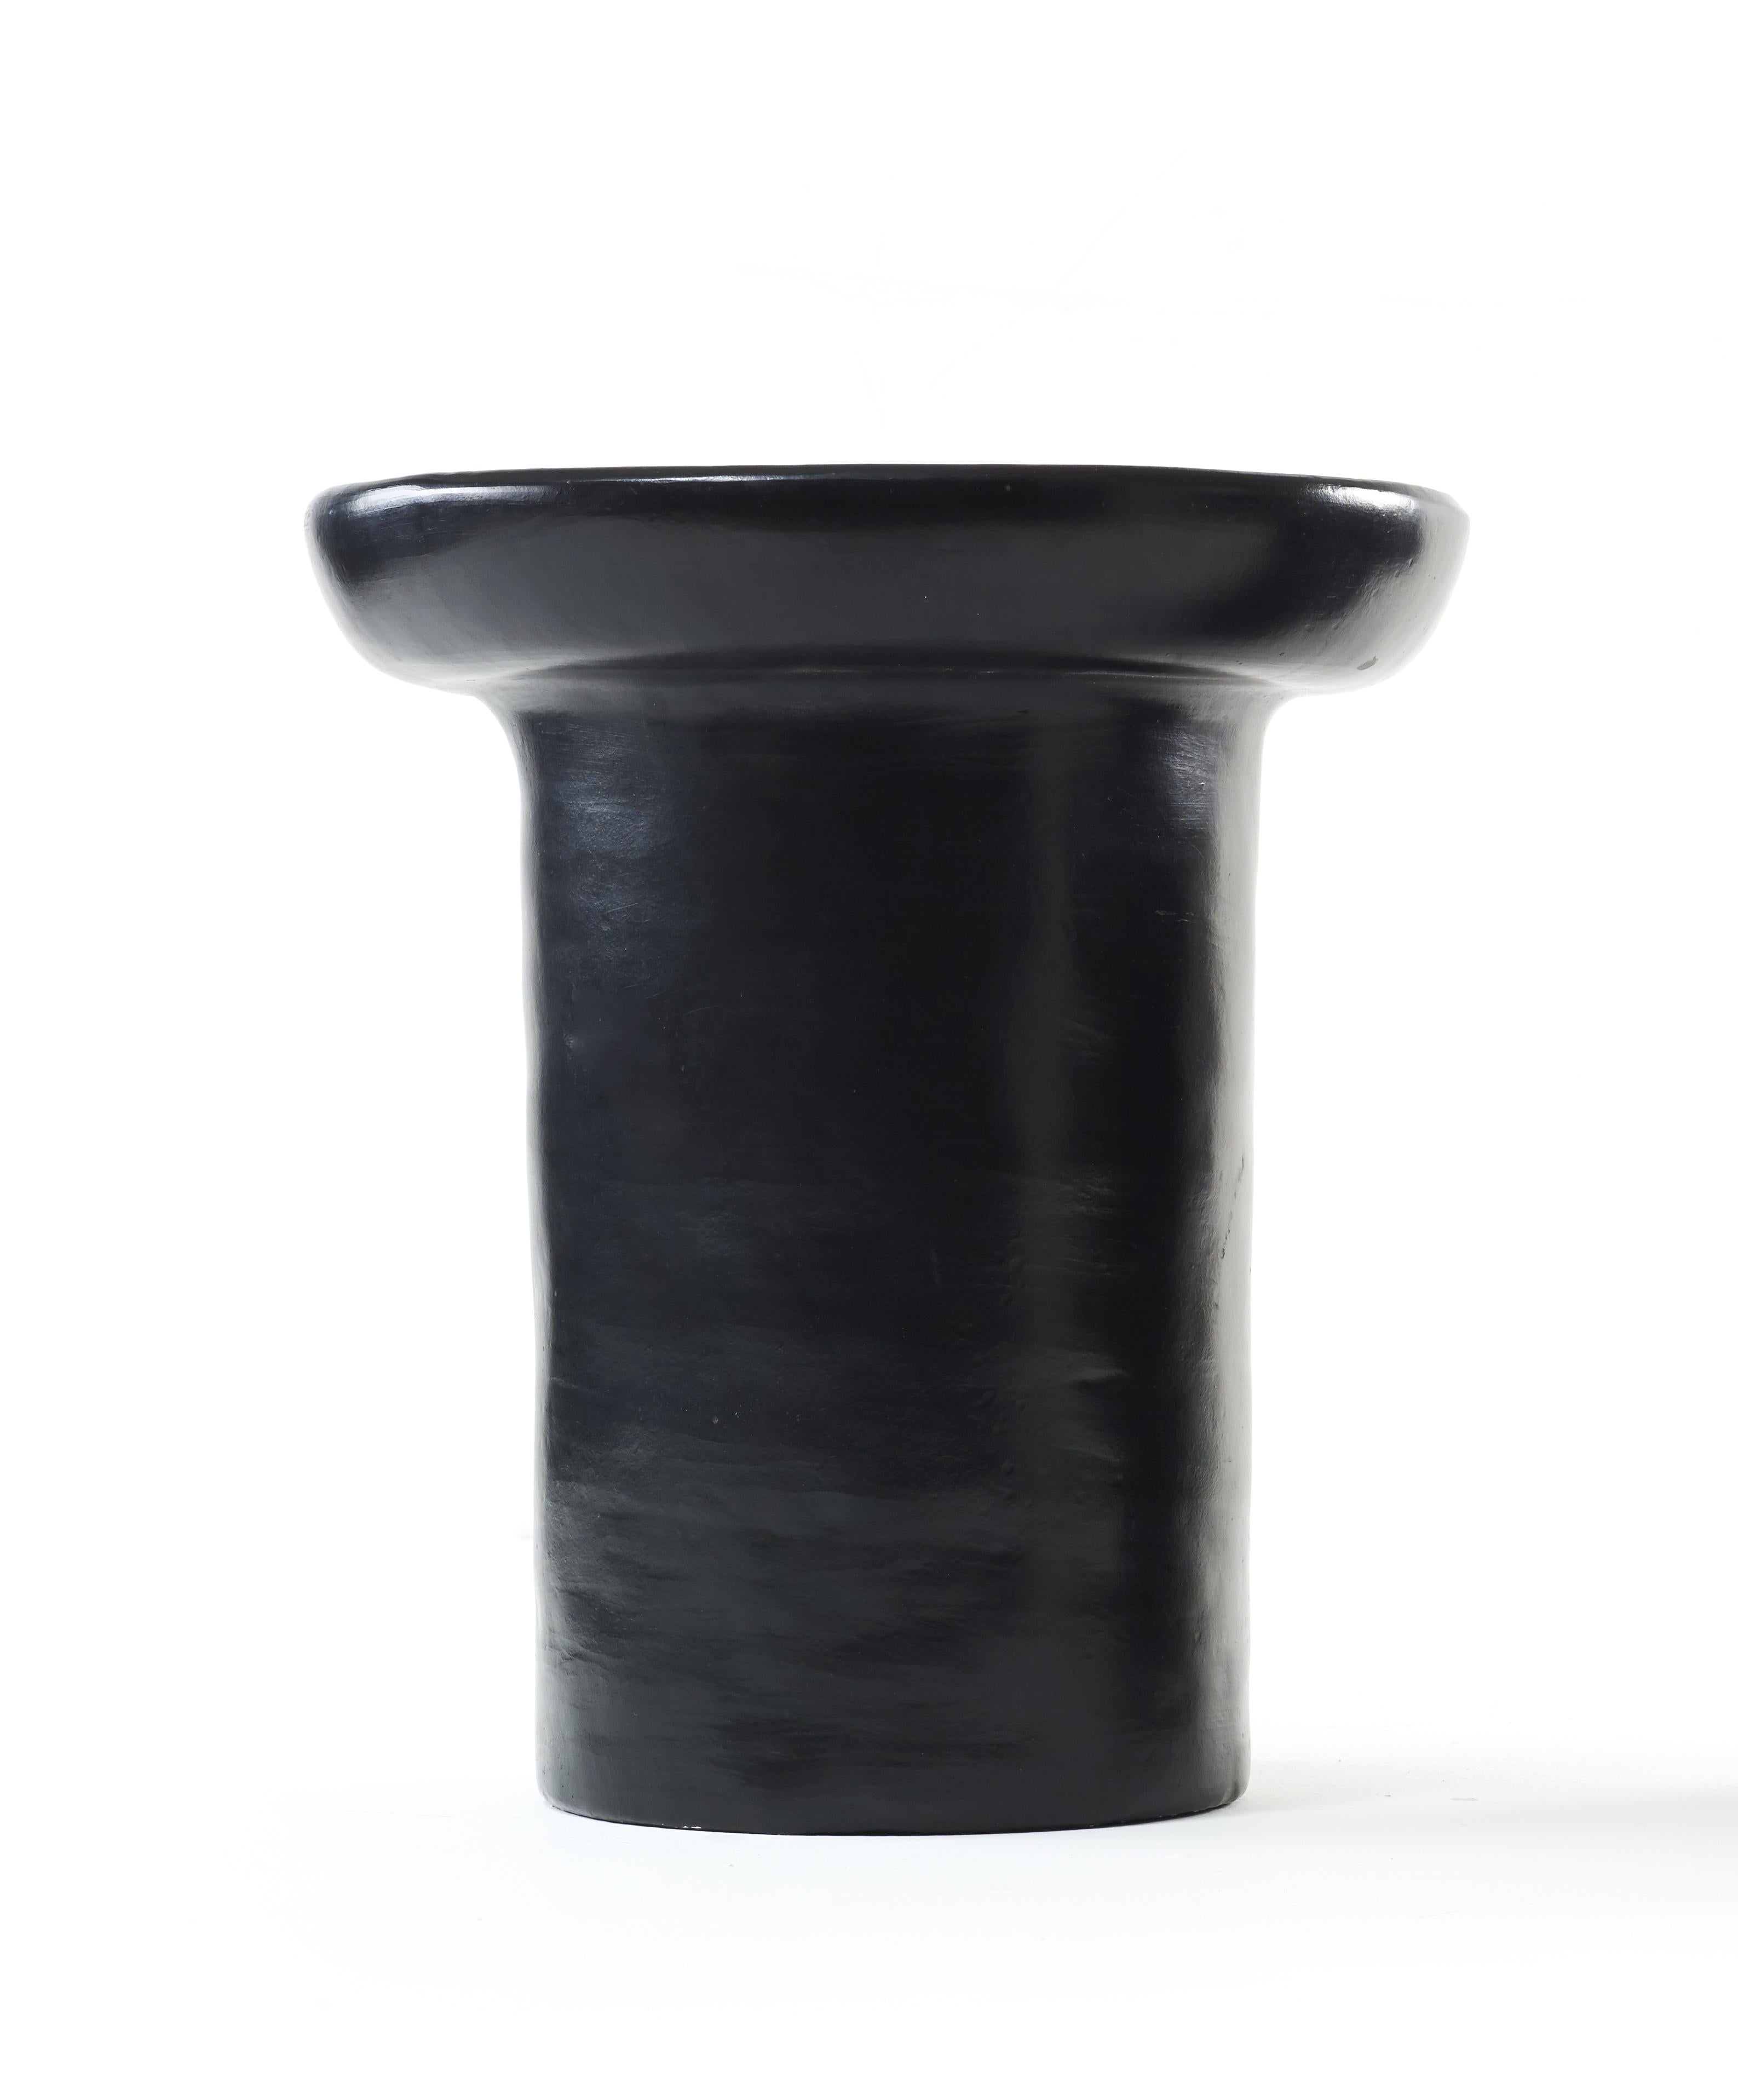 Black large nuna side table by Sebastian Herkner
Materials: Heat-resistant black and red ceramic. 
Technique: Glazed. Oven cooked and polished with semi-precious stones.
Dimensions: Diameter 33 cm x height 40 cm 
Available in colors red, and